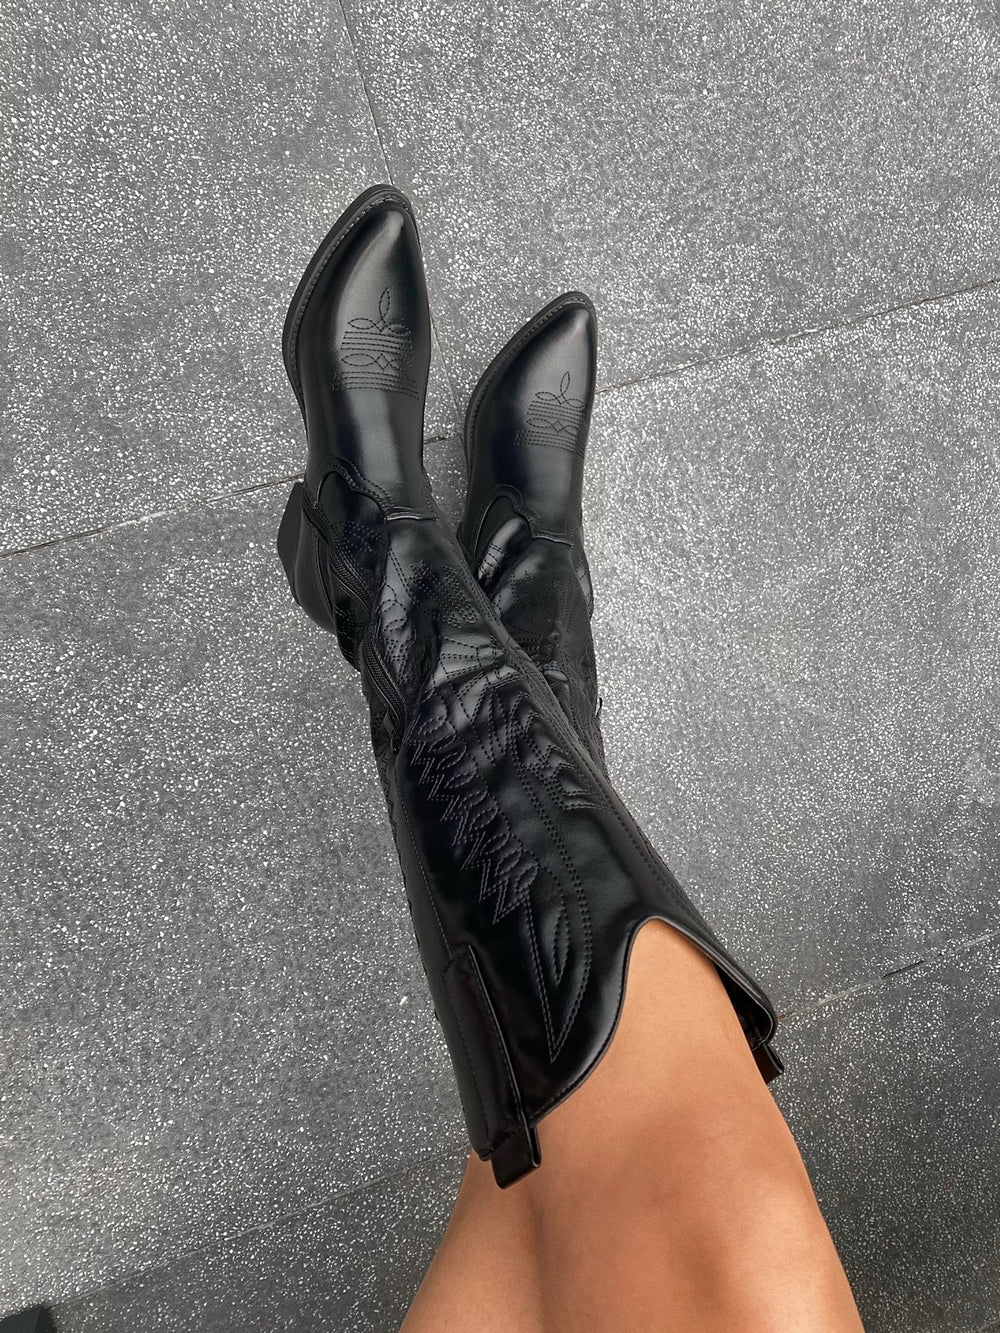 Western Boots High Black